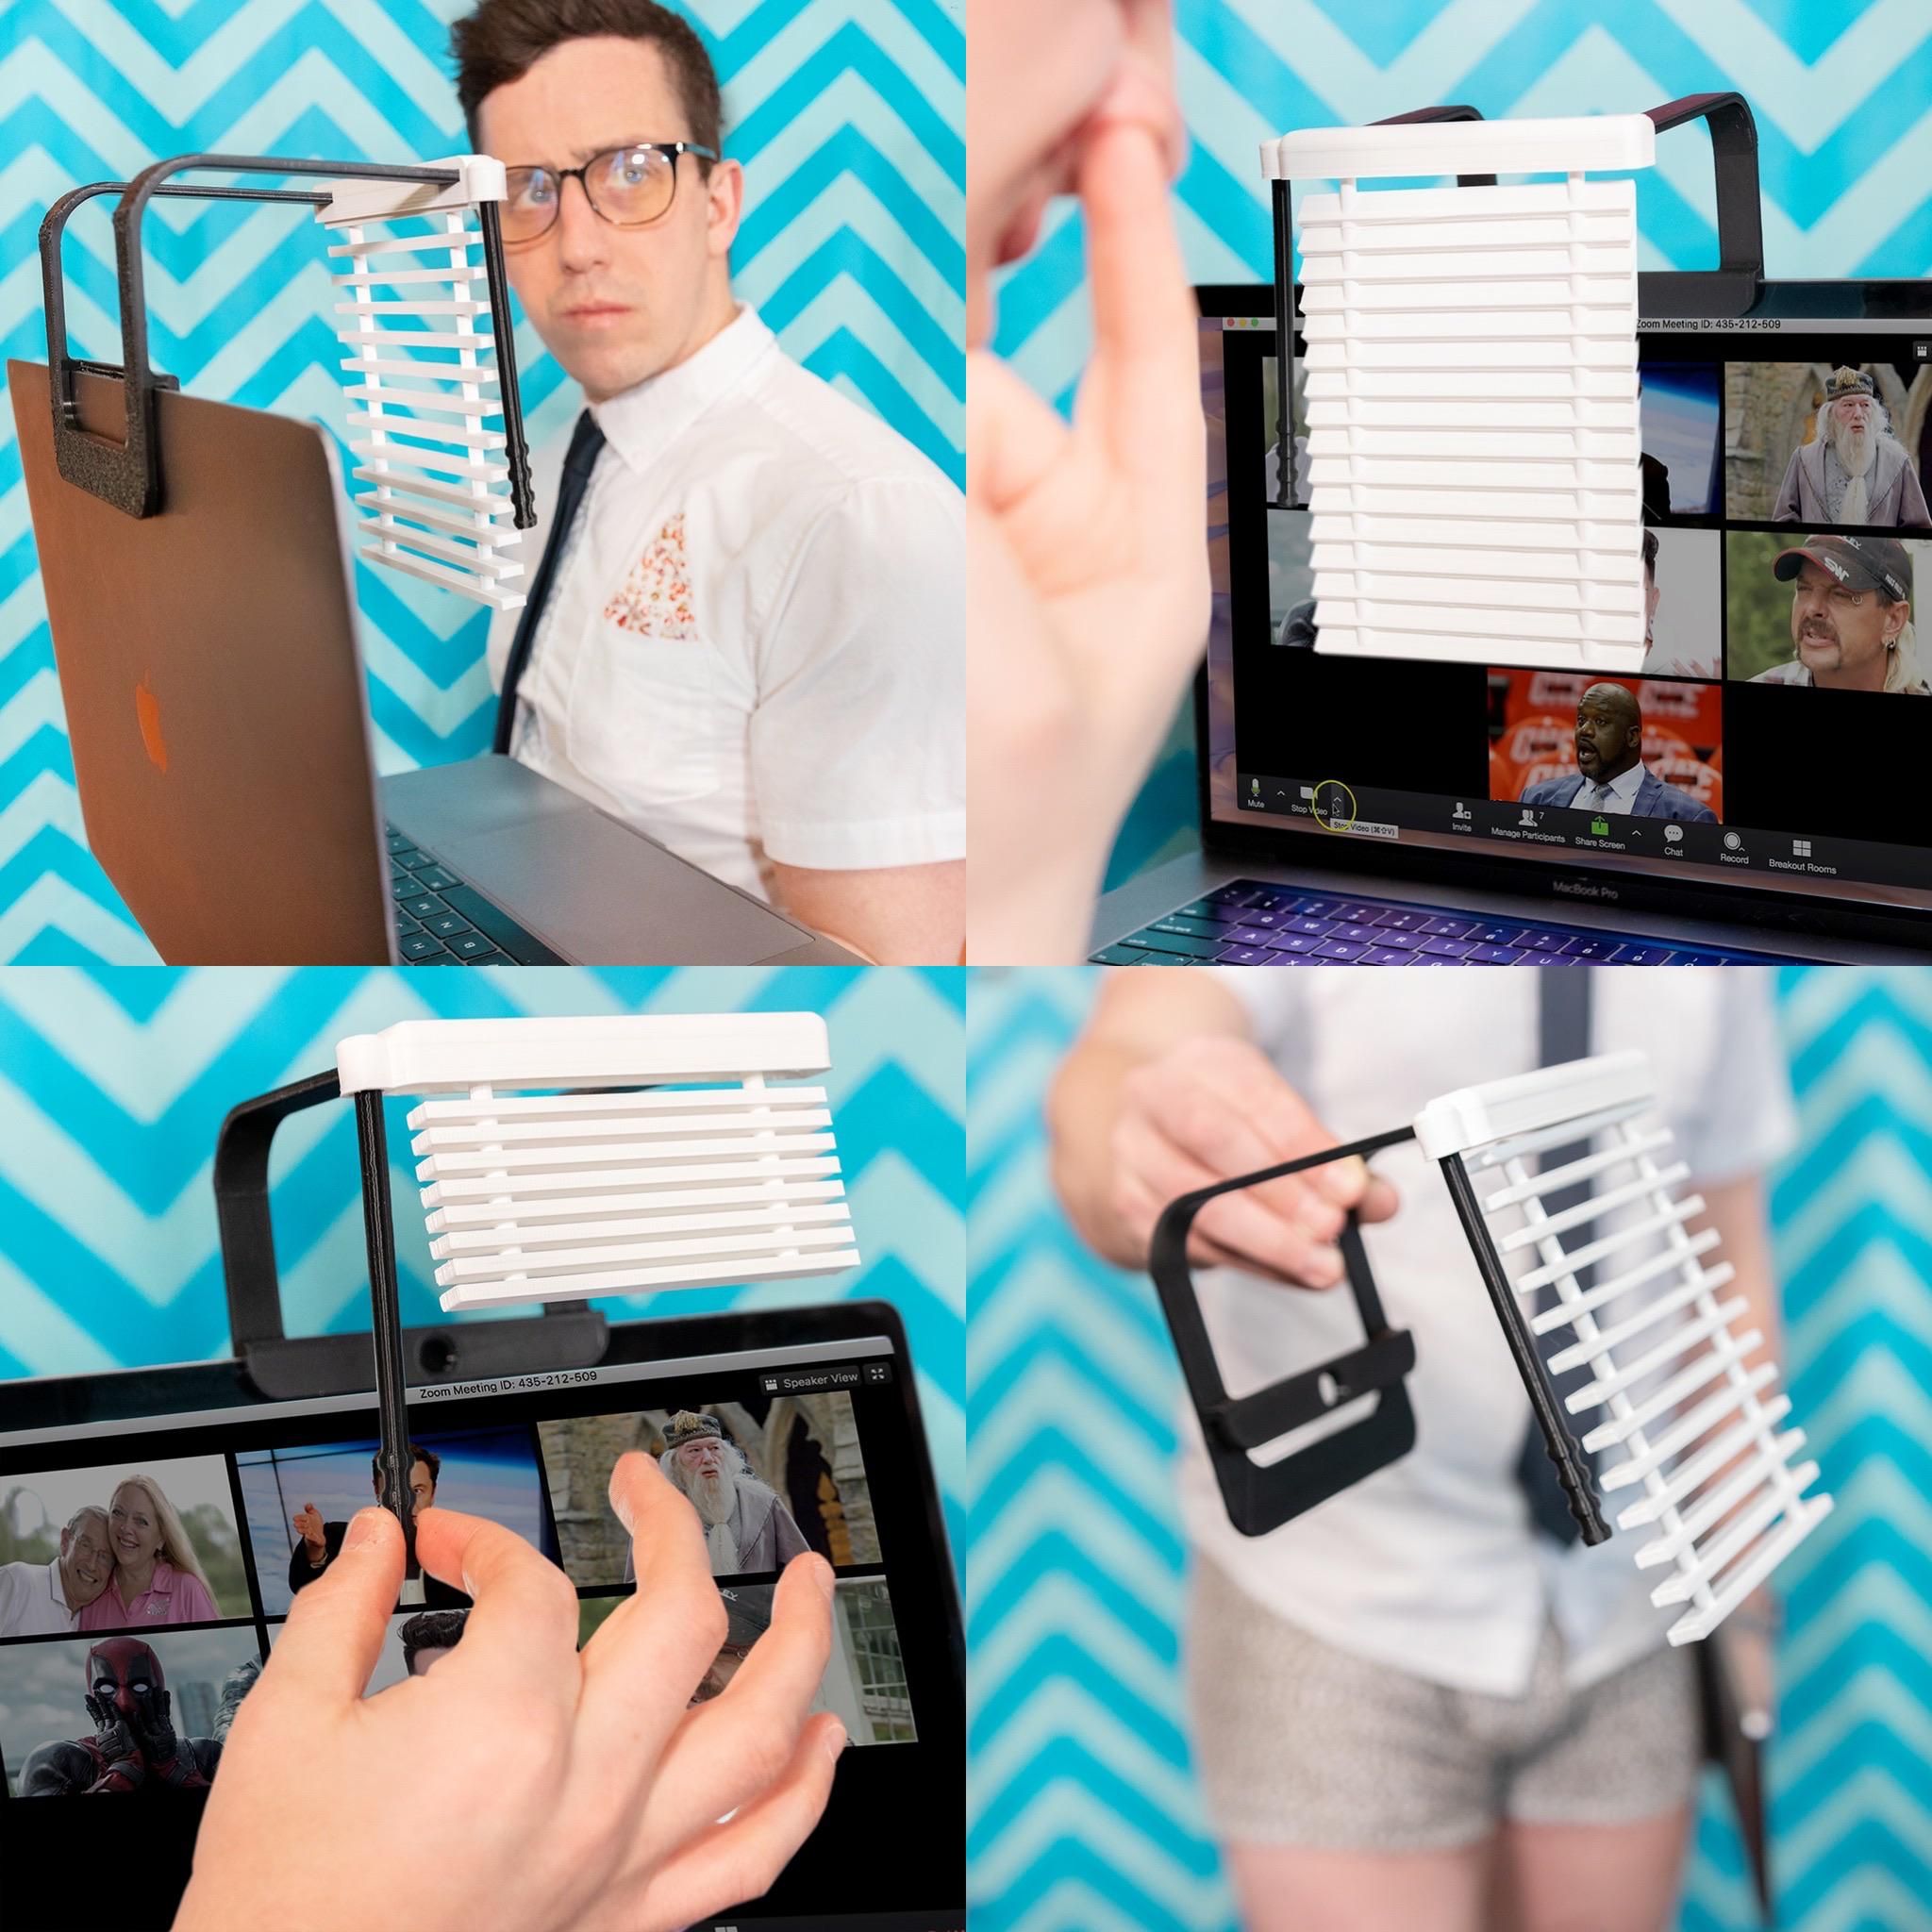 I like to design unnecessary products so I created a pair of shutter for Zoom meetings.